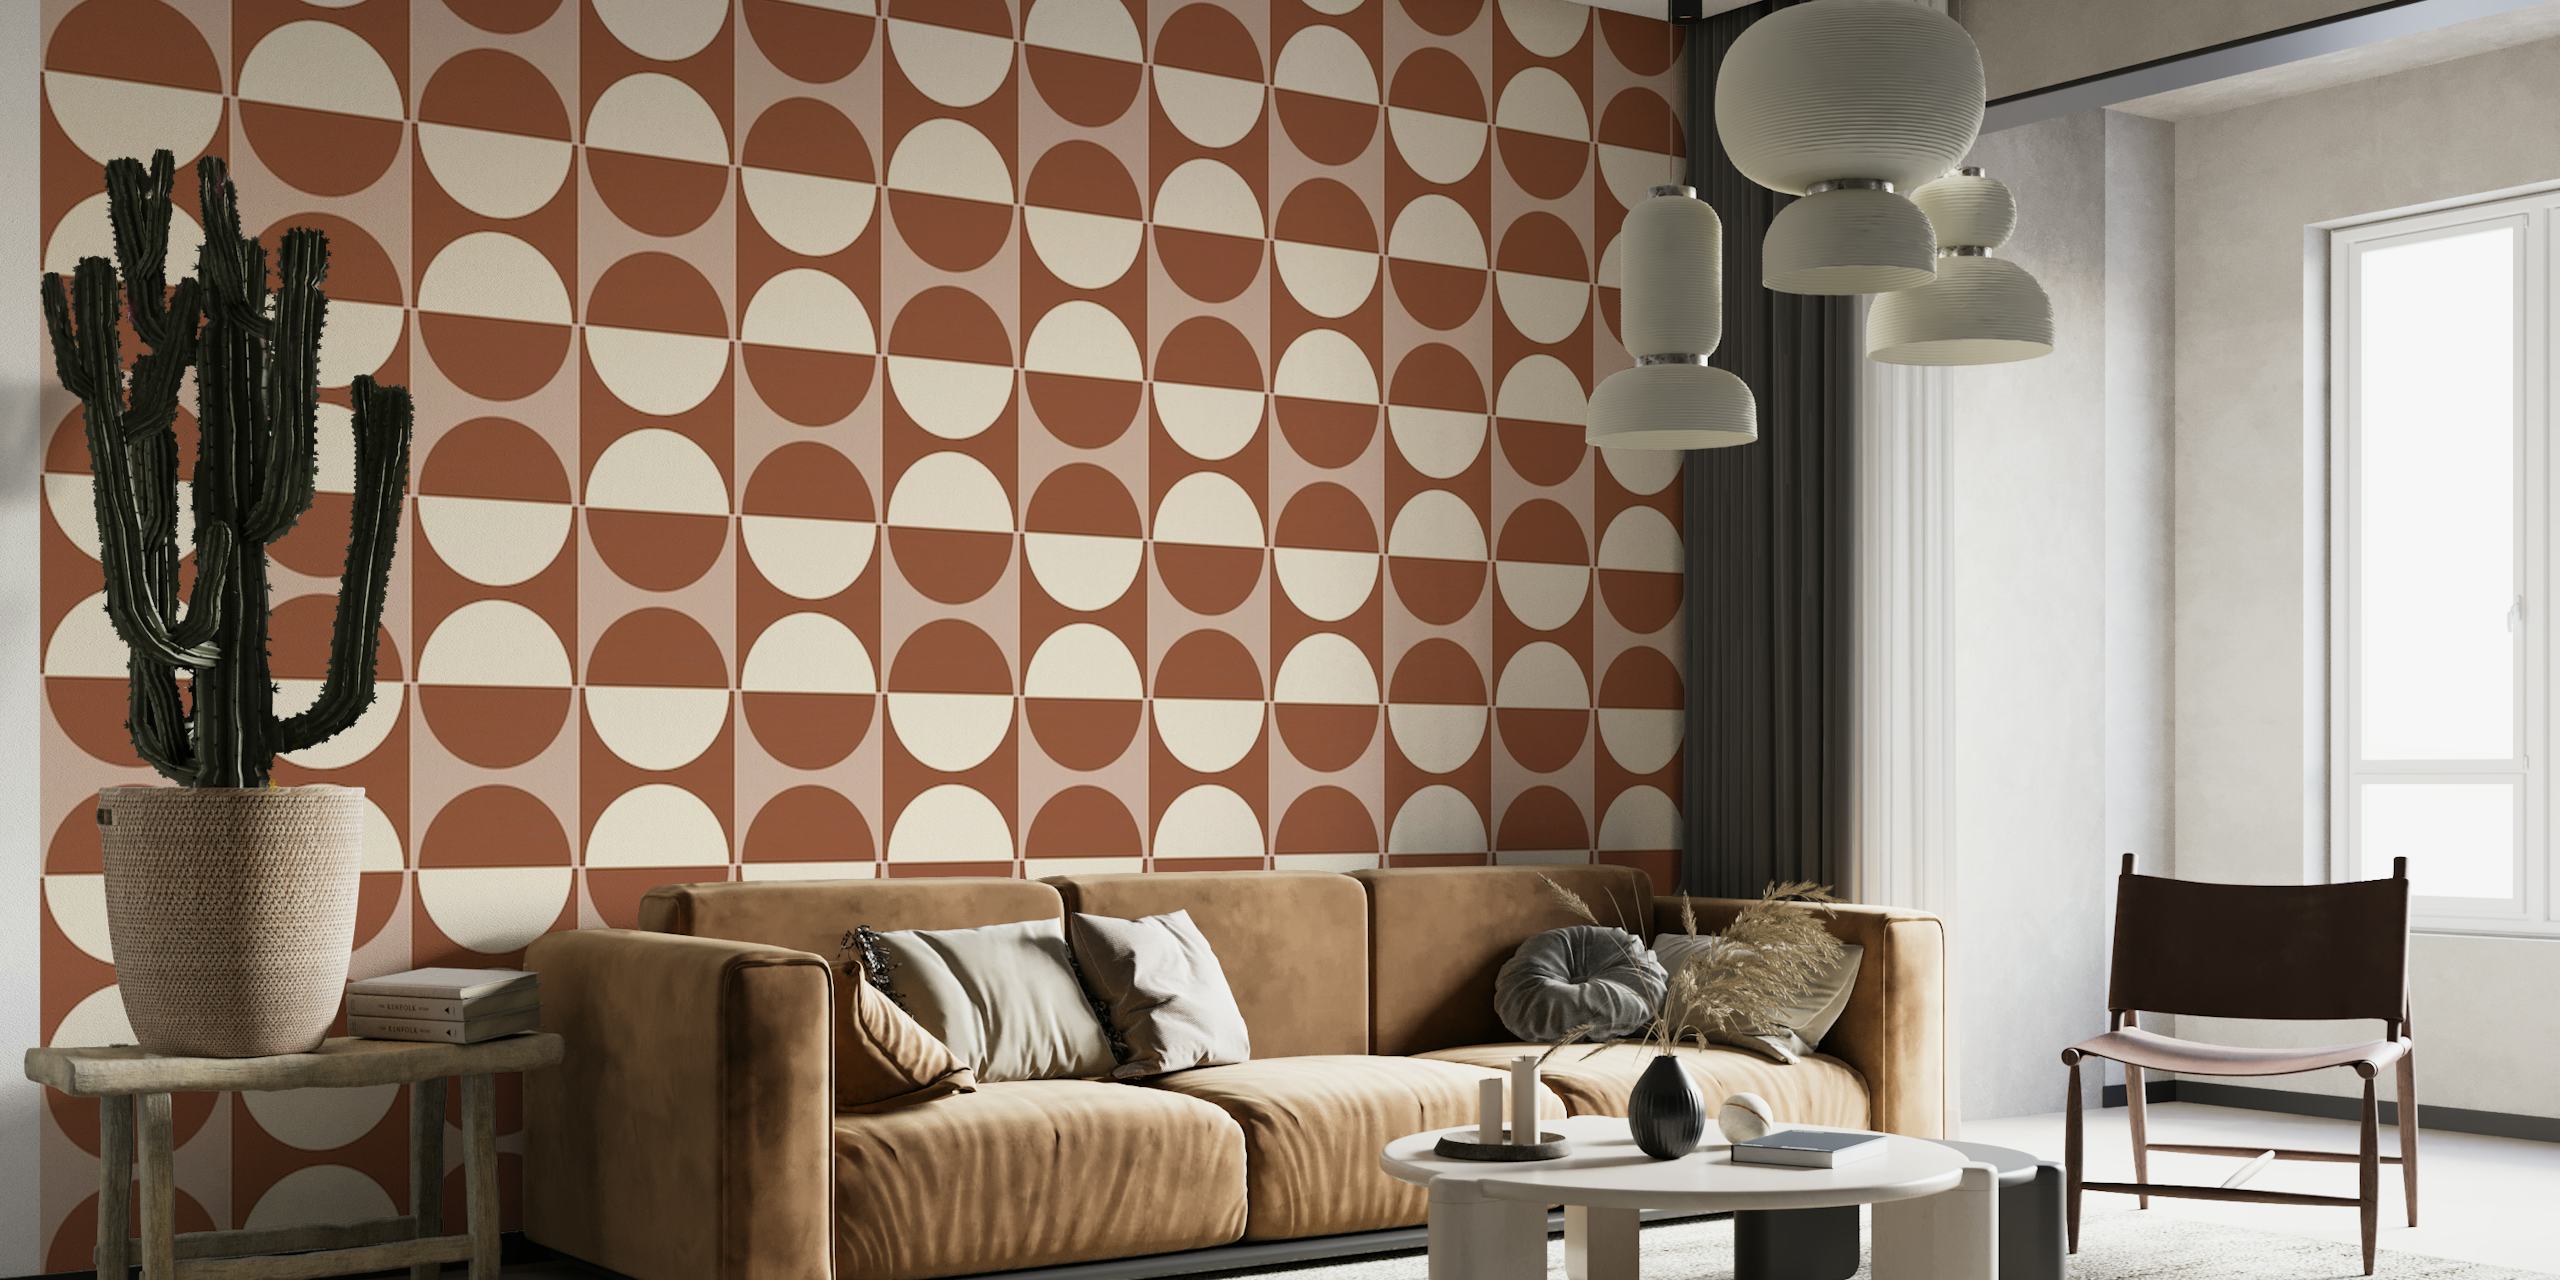 Painted Cotto Tiles Cinnamon and Cream wall mural